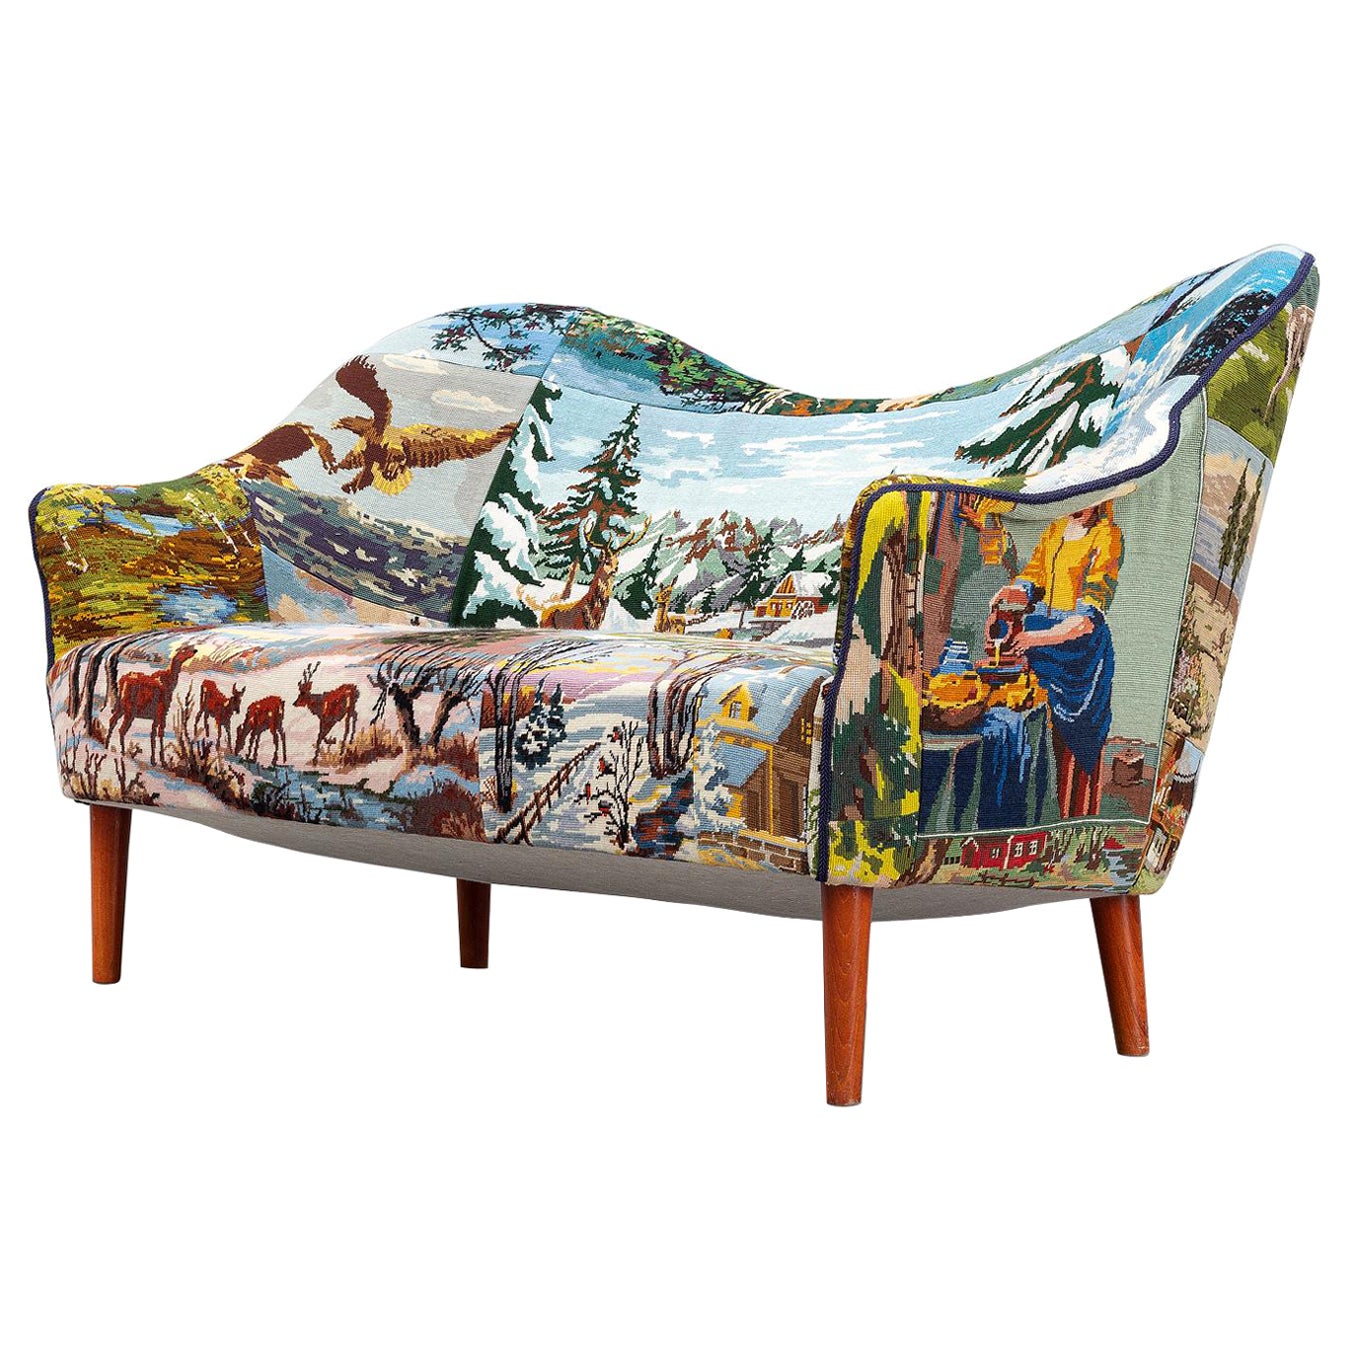 One Of A Kind "Samspel" Loveseat By Carl Malmsten In Recycled Embriodery